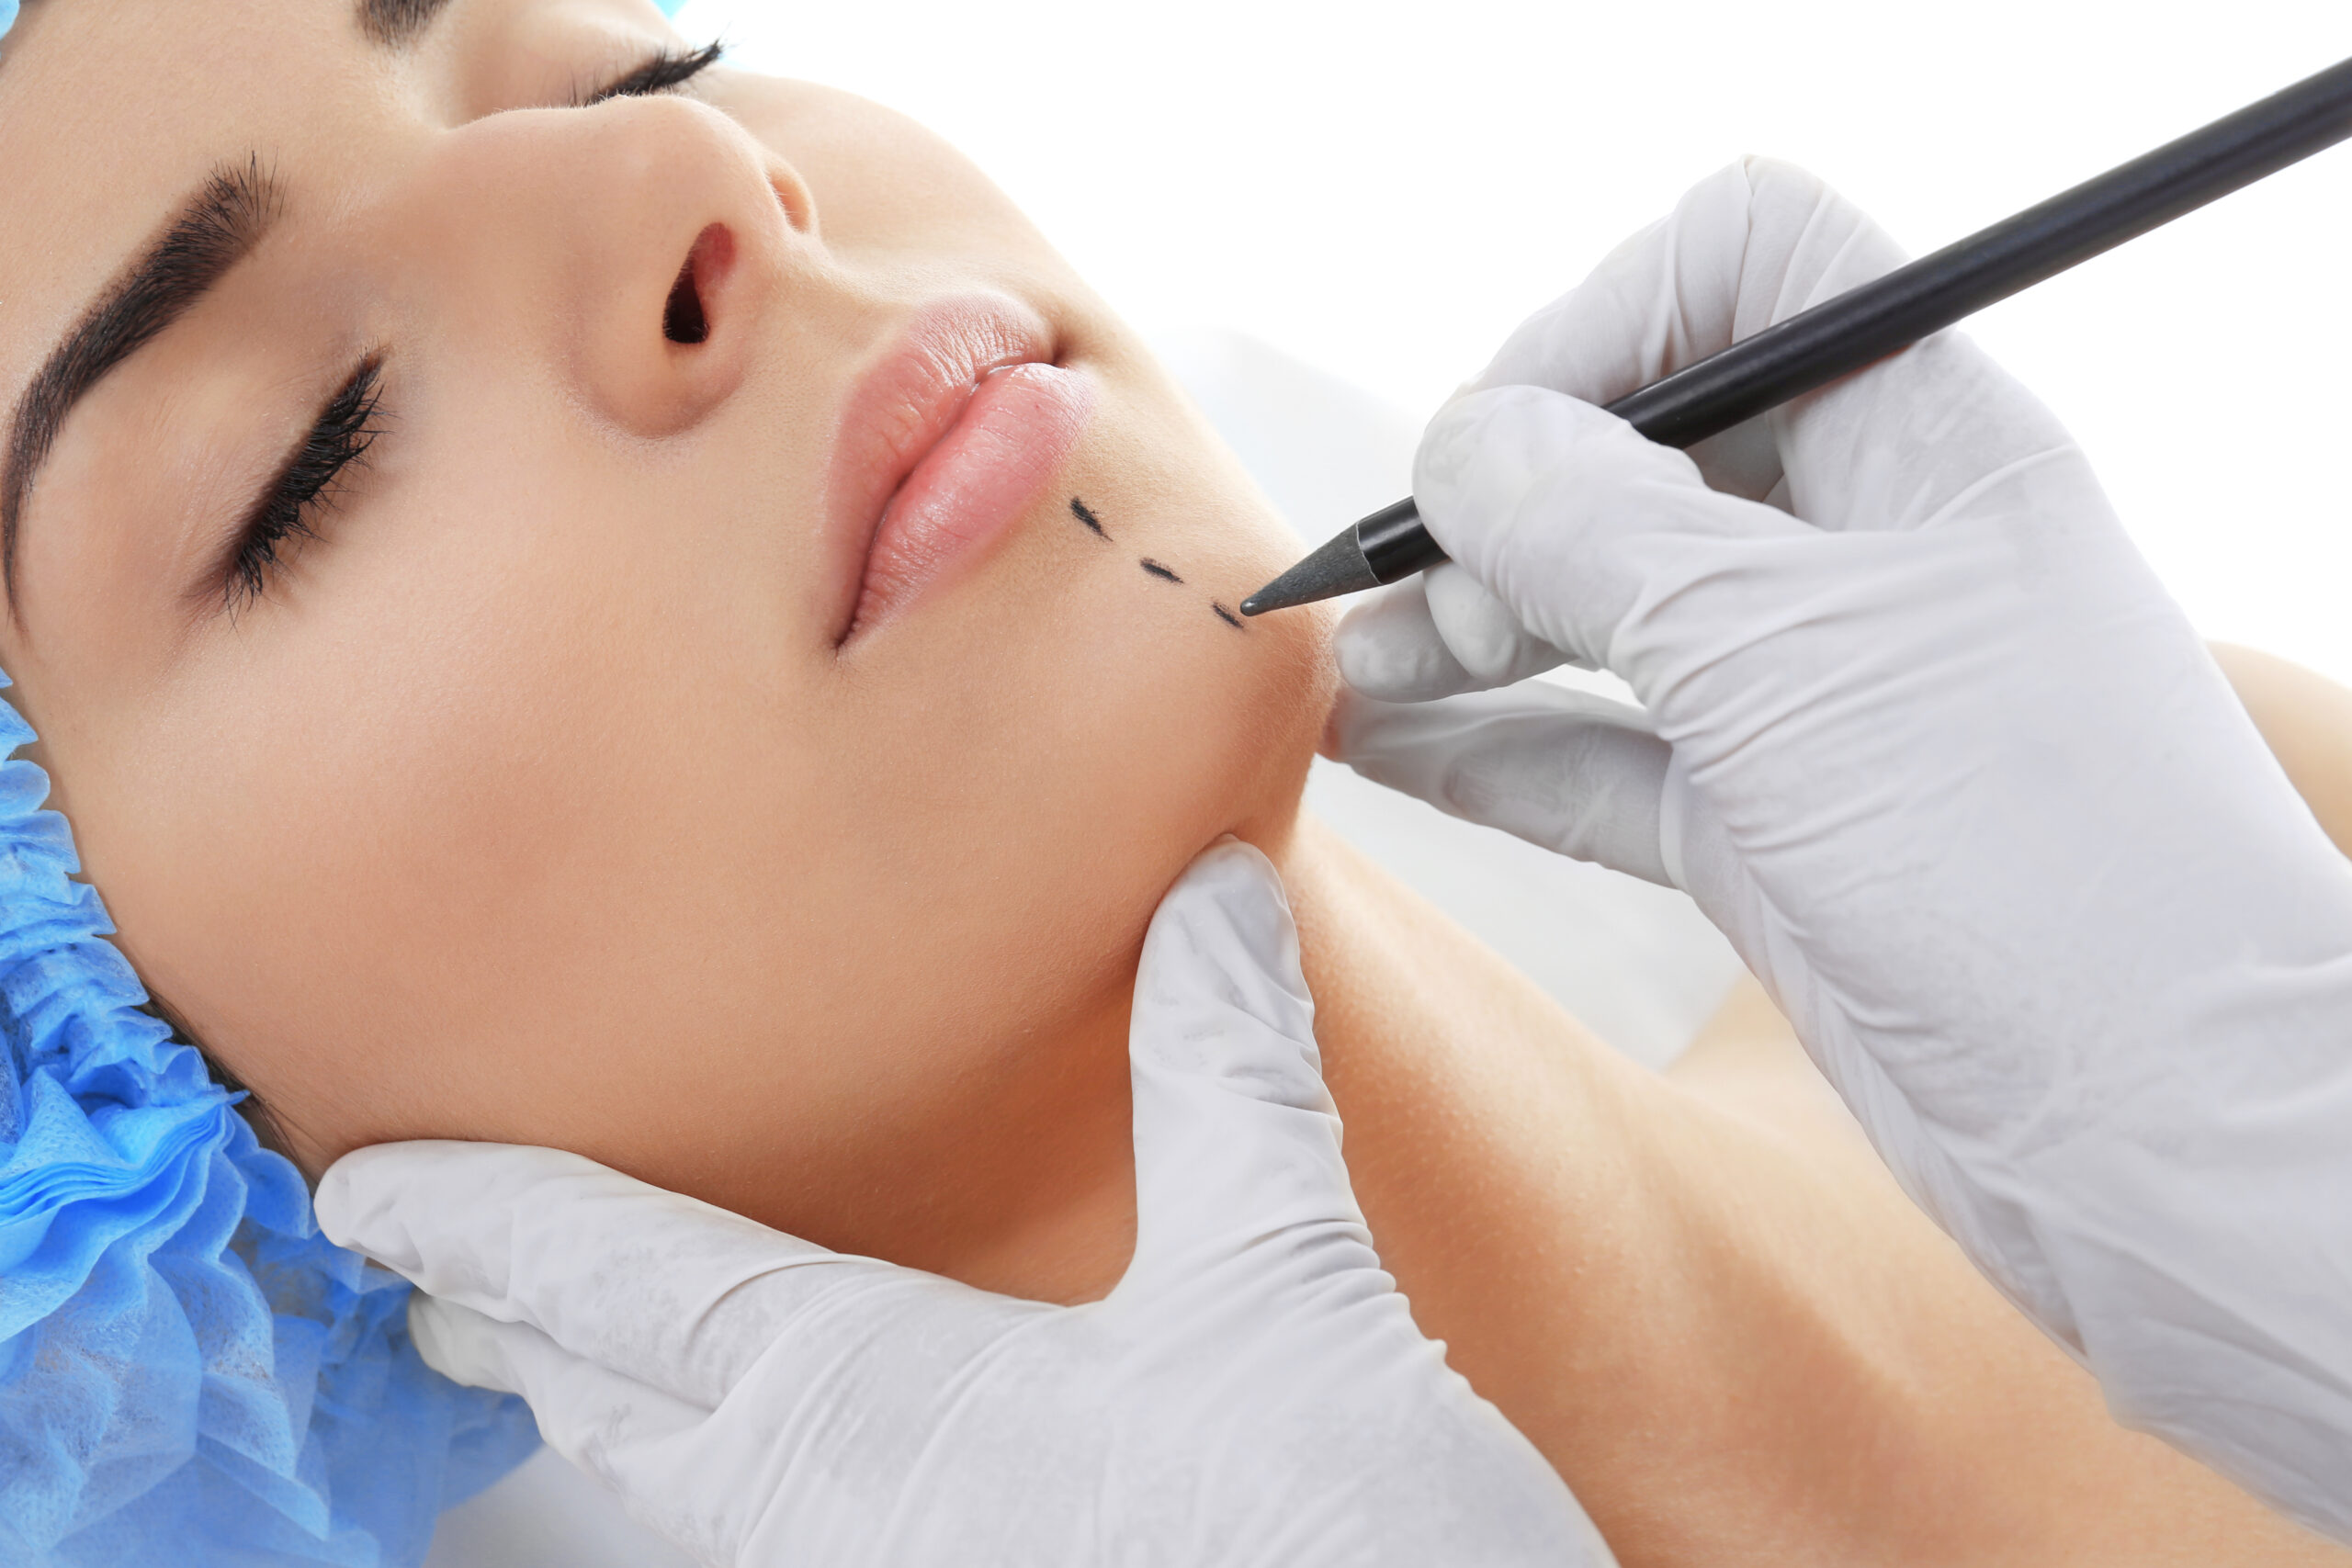 Choosing the Right Plastic Surgeon: What to Look for and What to Avoid